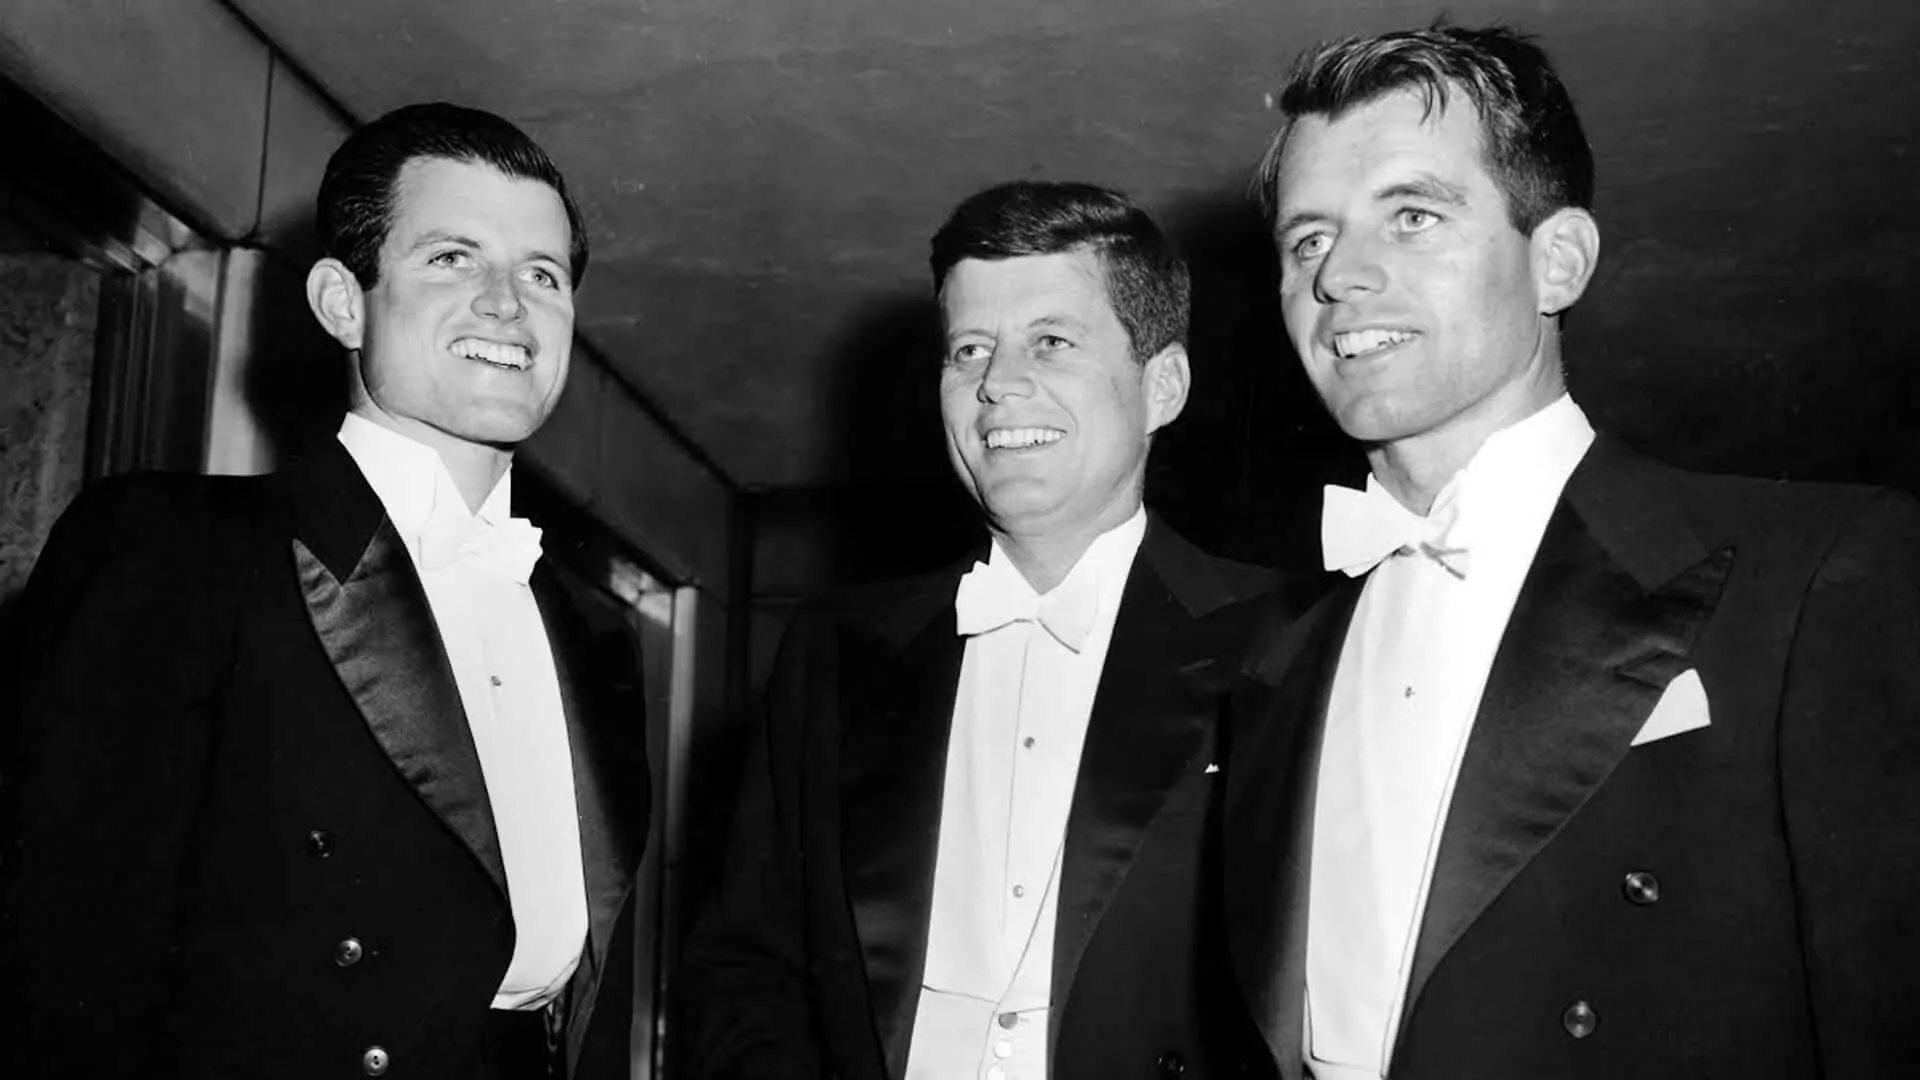 Ted John and Robert Kennedy in White Tie